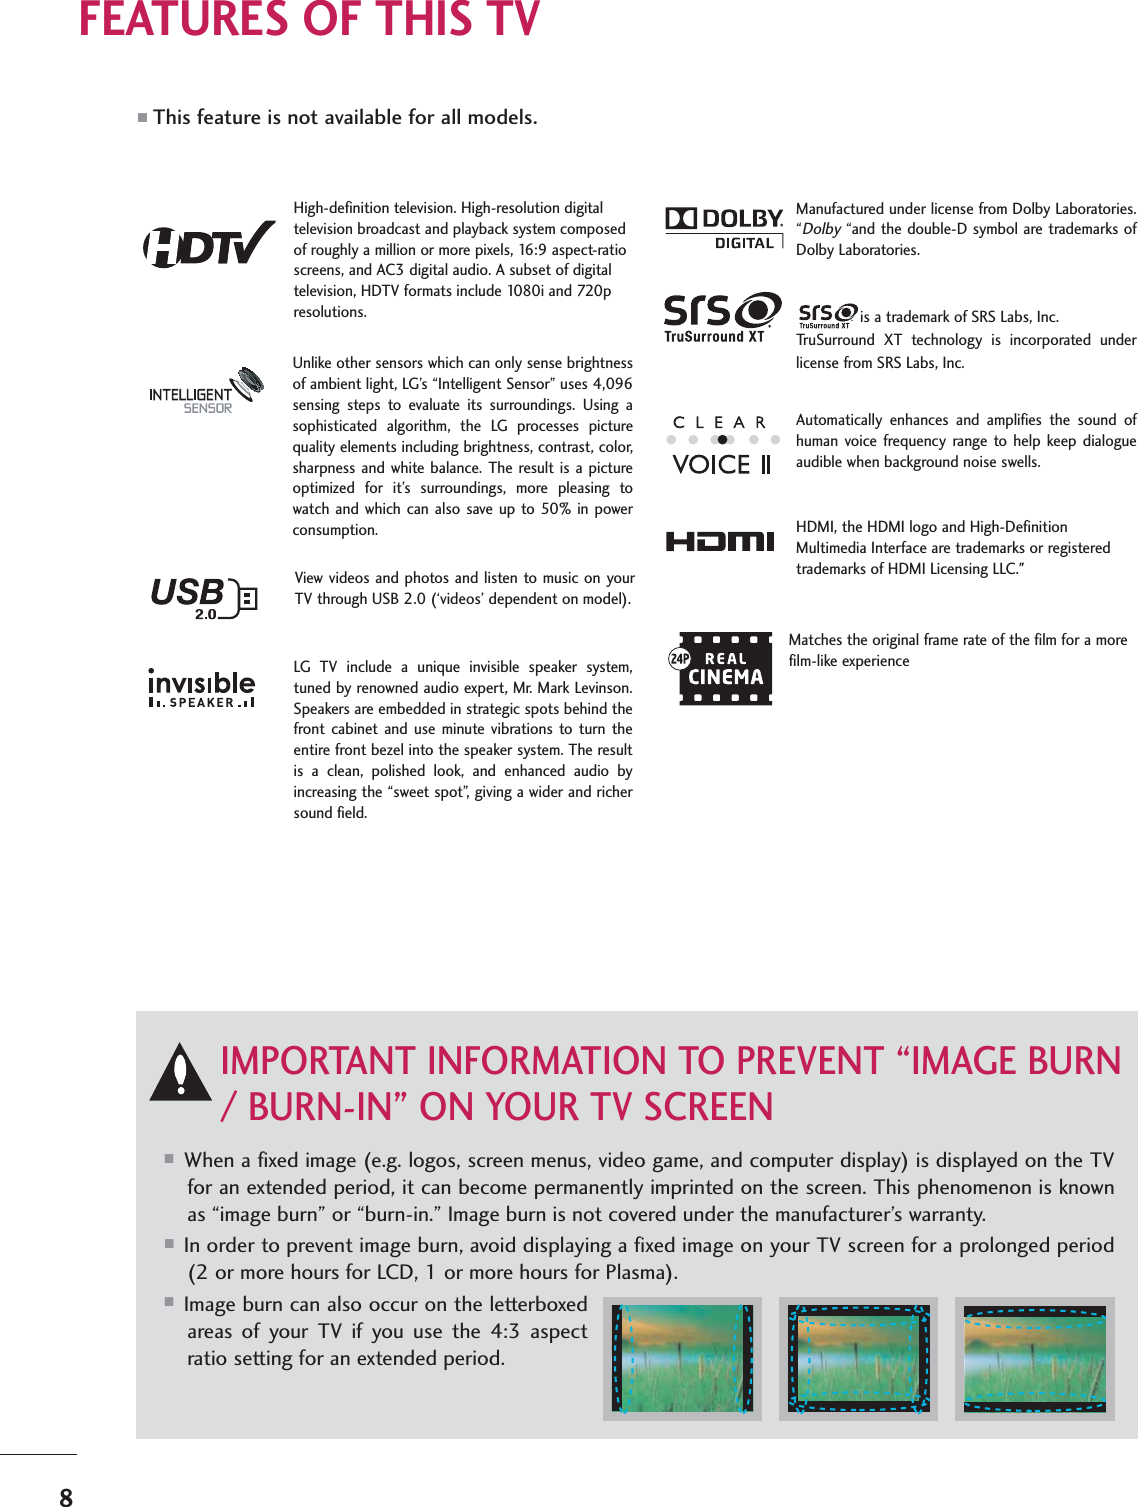 8FEATURES OF THIS TV■When a fixed image (e.g. logos, screen menus, video game, and computer display) is displayed on the TVfor an extended period, it can become permanently imprinted on the screen. This phenomenon is knownas “image burn” or “burn-in.” Image burn is not covered under the manufacturer’s warranty. ■In order to prevent image burn, avoid displaying a fixed image on your TV screen for a prolonged period(2 or more hours for LCD, 1 or more hours for Plasma). ■Image burn can also occur on the letterboxedareas of your TV if you use the 4:3 aspectratio setting for an extended period.IMPORTANT INFORMATION TO PREVENT “IMAGE BURN/ BURN-IN” ON YOUR TV SCREENAutomatically enhances and amplifies the sound ofhuman voice frequency range to help keep dialogueaudible when background noise swells.LG TV include a unique invisible speaker system,tuned by renowned audio expert, Mr. Mark Levinson.Speakers are embedded in strategic spots behind thefront cabinet and use minute vibrations to turn theentire front bezel into the speaker system. The resultis a clean, polished look, and enhanced audio byincreasing the “sweet spot”, giving a wider and richersound field. HDMI, the HDMI logo and High-DefinitionMultimedia Interface are trademarks or registeredtrademarks of HDMI Licensing LLC.&quot;is a trademark of SRS Labs, Inc.TruSurround XT technology is incorporated underlicense from SRS Labs, Inc.Manufactured under license from Dolby Laboratories.“Dolby“and the double-D symbol are trademarks ofDolby Laboratories. High-definition television. High-resolution digitaltelevision broadcast and playback system composedof roughly a million or more pixels, 16:9 aspect-ratioscreens, and AC3 digital audio. A subset of digitaltelevision, HDTV formats include 1080i and 720presolutions.Unlike other sensors which can only sense brightnessof ambient light, LG’s “Intelligent Sensor” uses 4,096sensing steps to evaluate its surroundings. Using asophisticated algorithm, the LG processes picturequality elements including brightness, contrast, color,sharpness and white balance. The result is a pictureoptimized for it’s surroundings, more pleasing towatch and which can also save up to 50% in powerconsumption. Matches the original frame rate of the film for a morefilm-like experienceView videos and photos and listen to music on yourTV through USB 2.0 (‘videos’ dependent on model).■This feature is not available for all models.